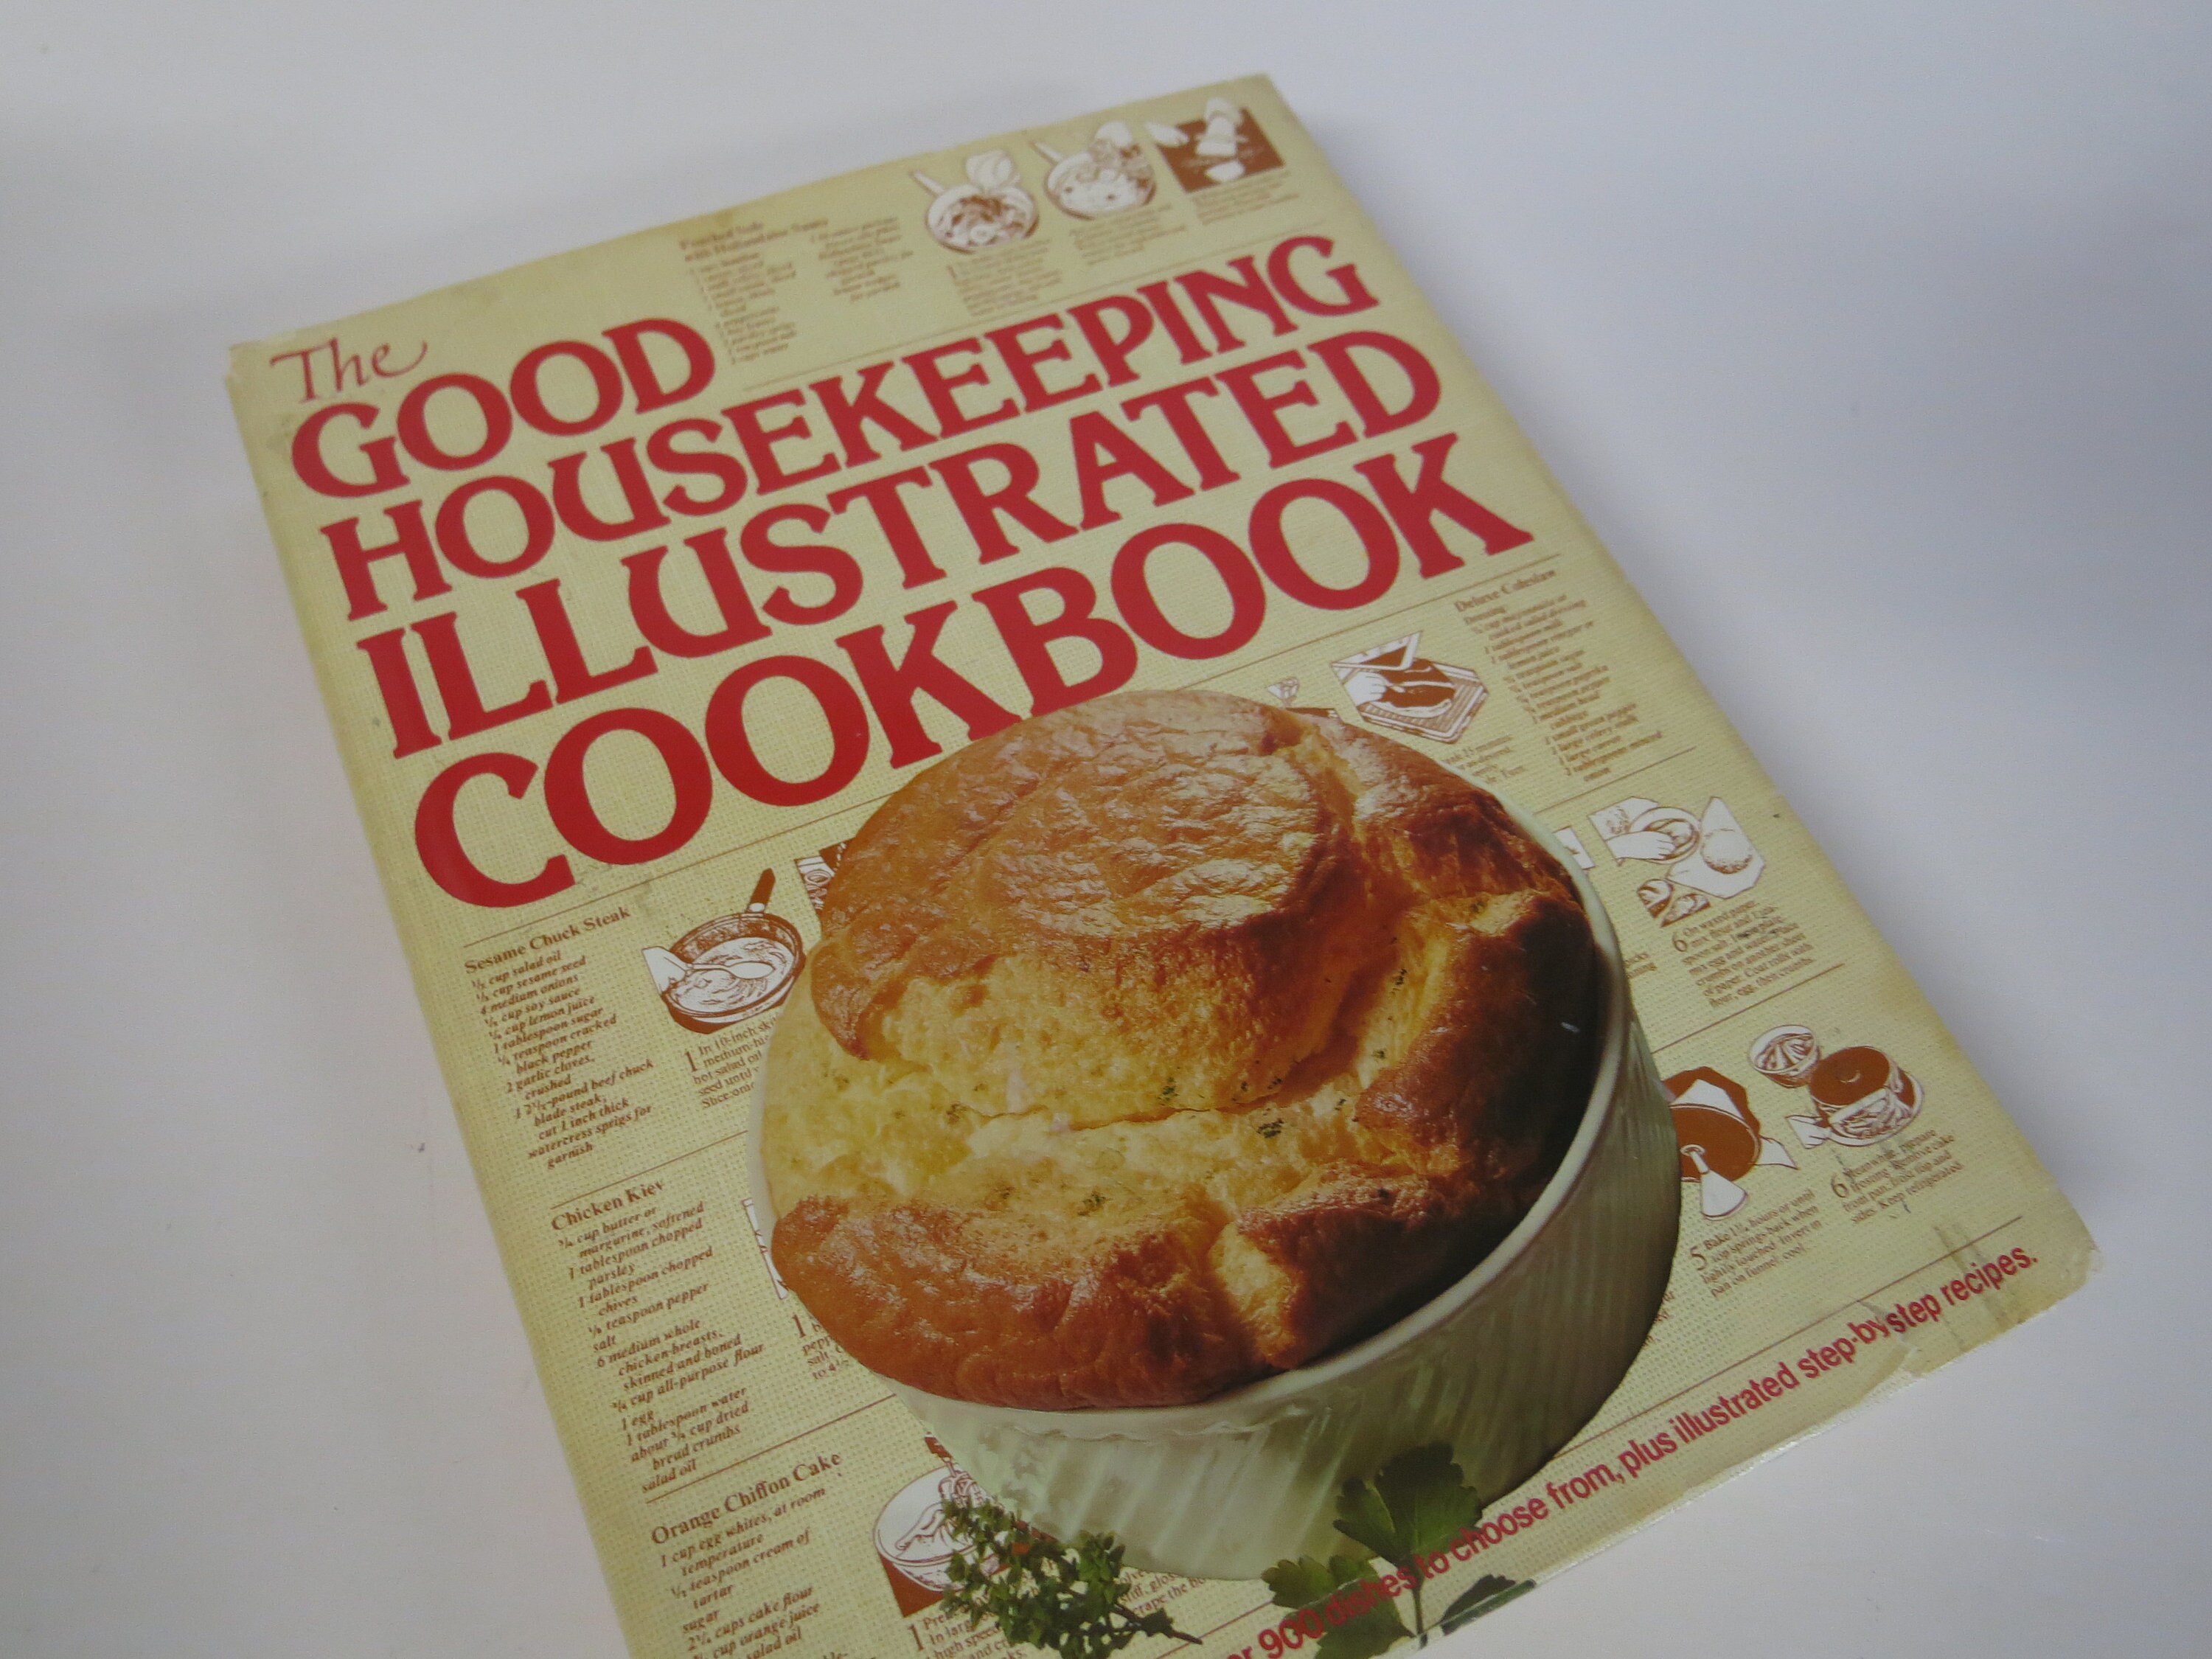 the good housekeeping illustrated cookbook free download